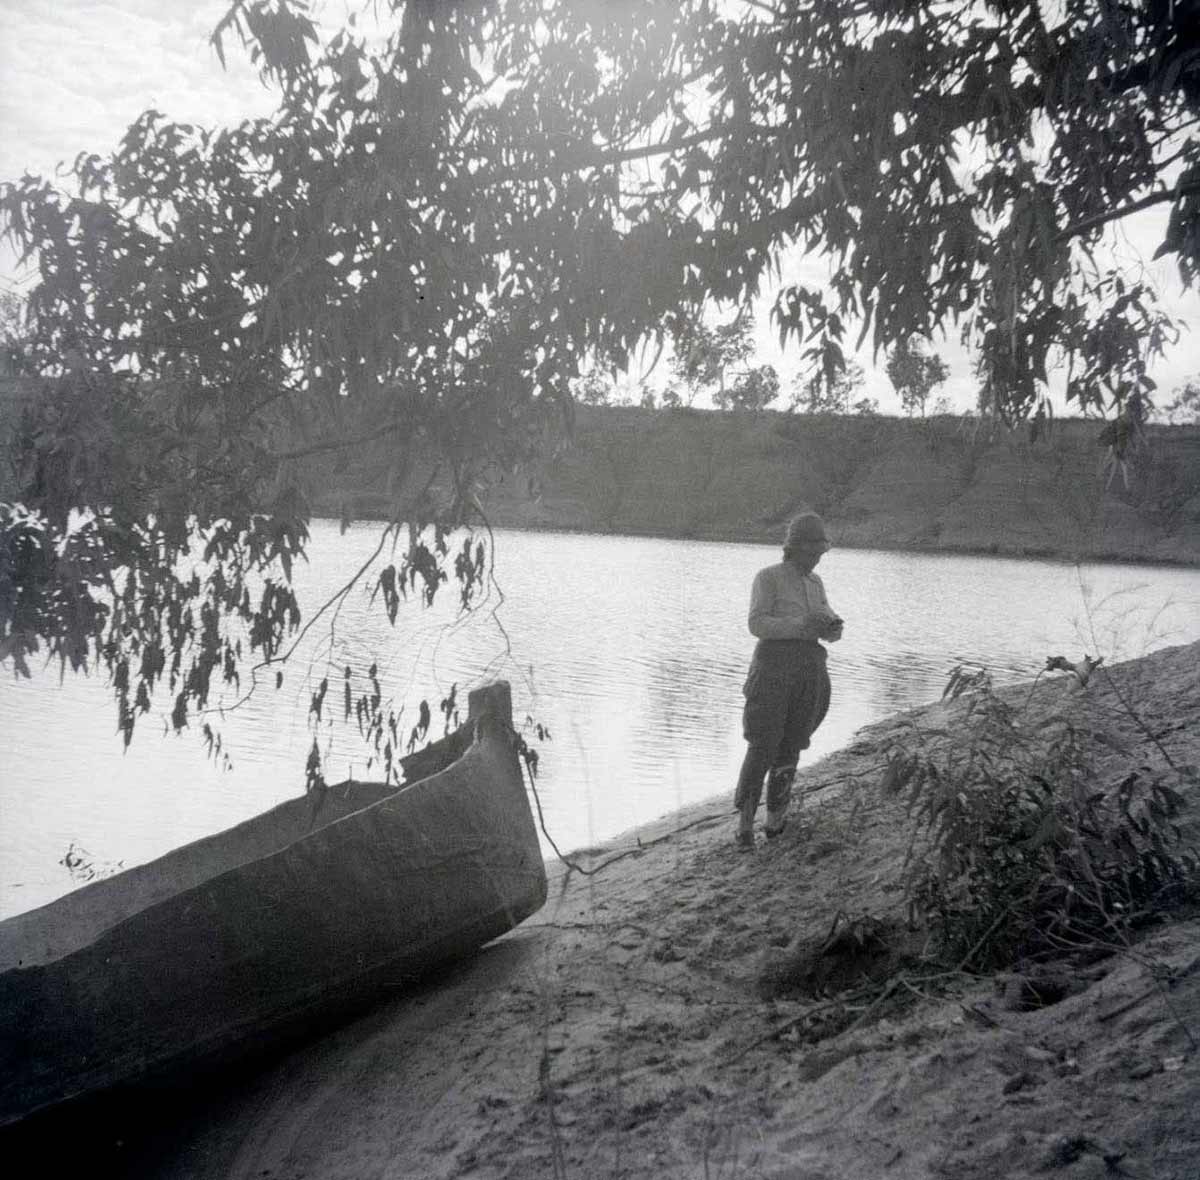 A black and white photographic negative that depicts an adult standing on a riverbank next to a canoe. - click to view larger image